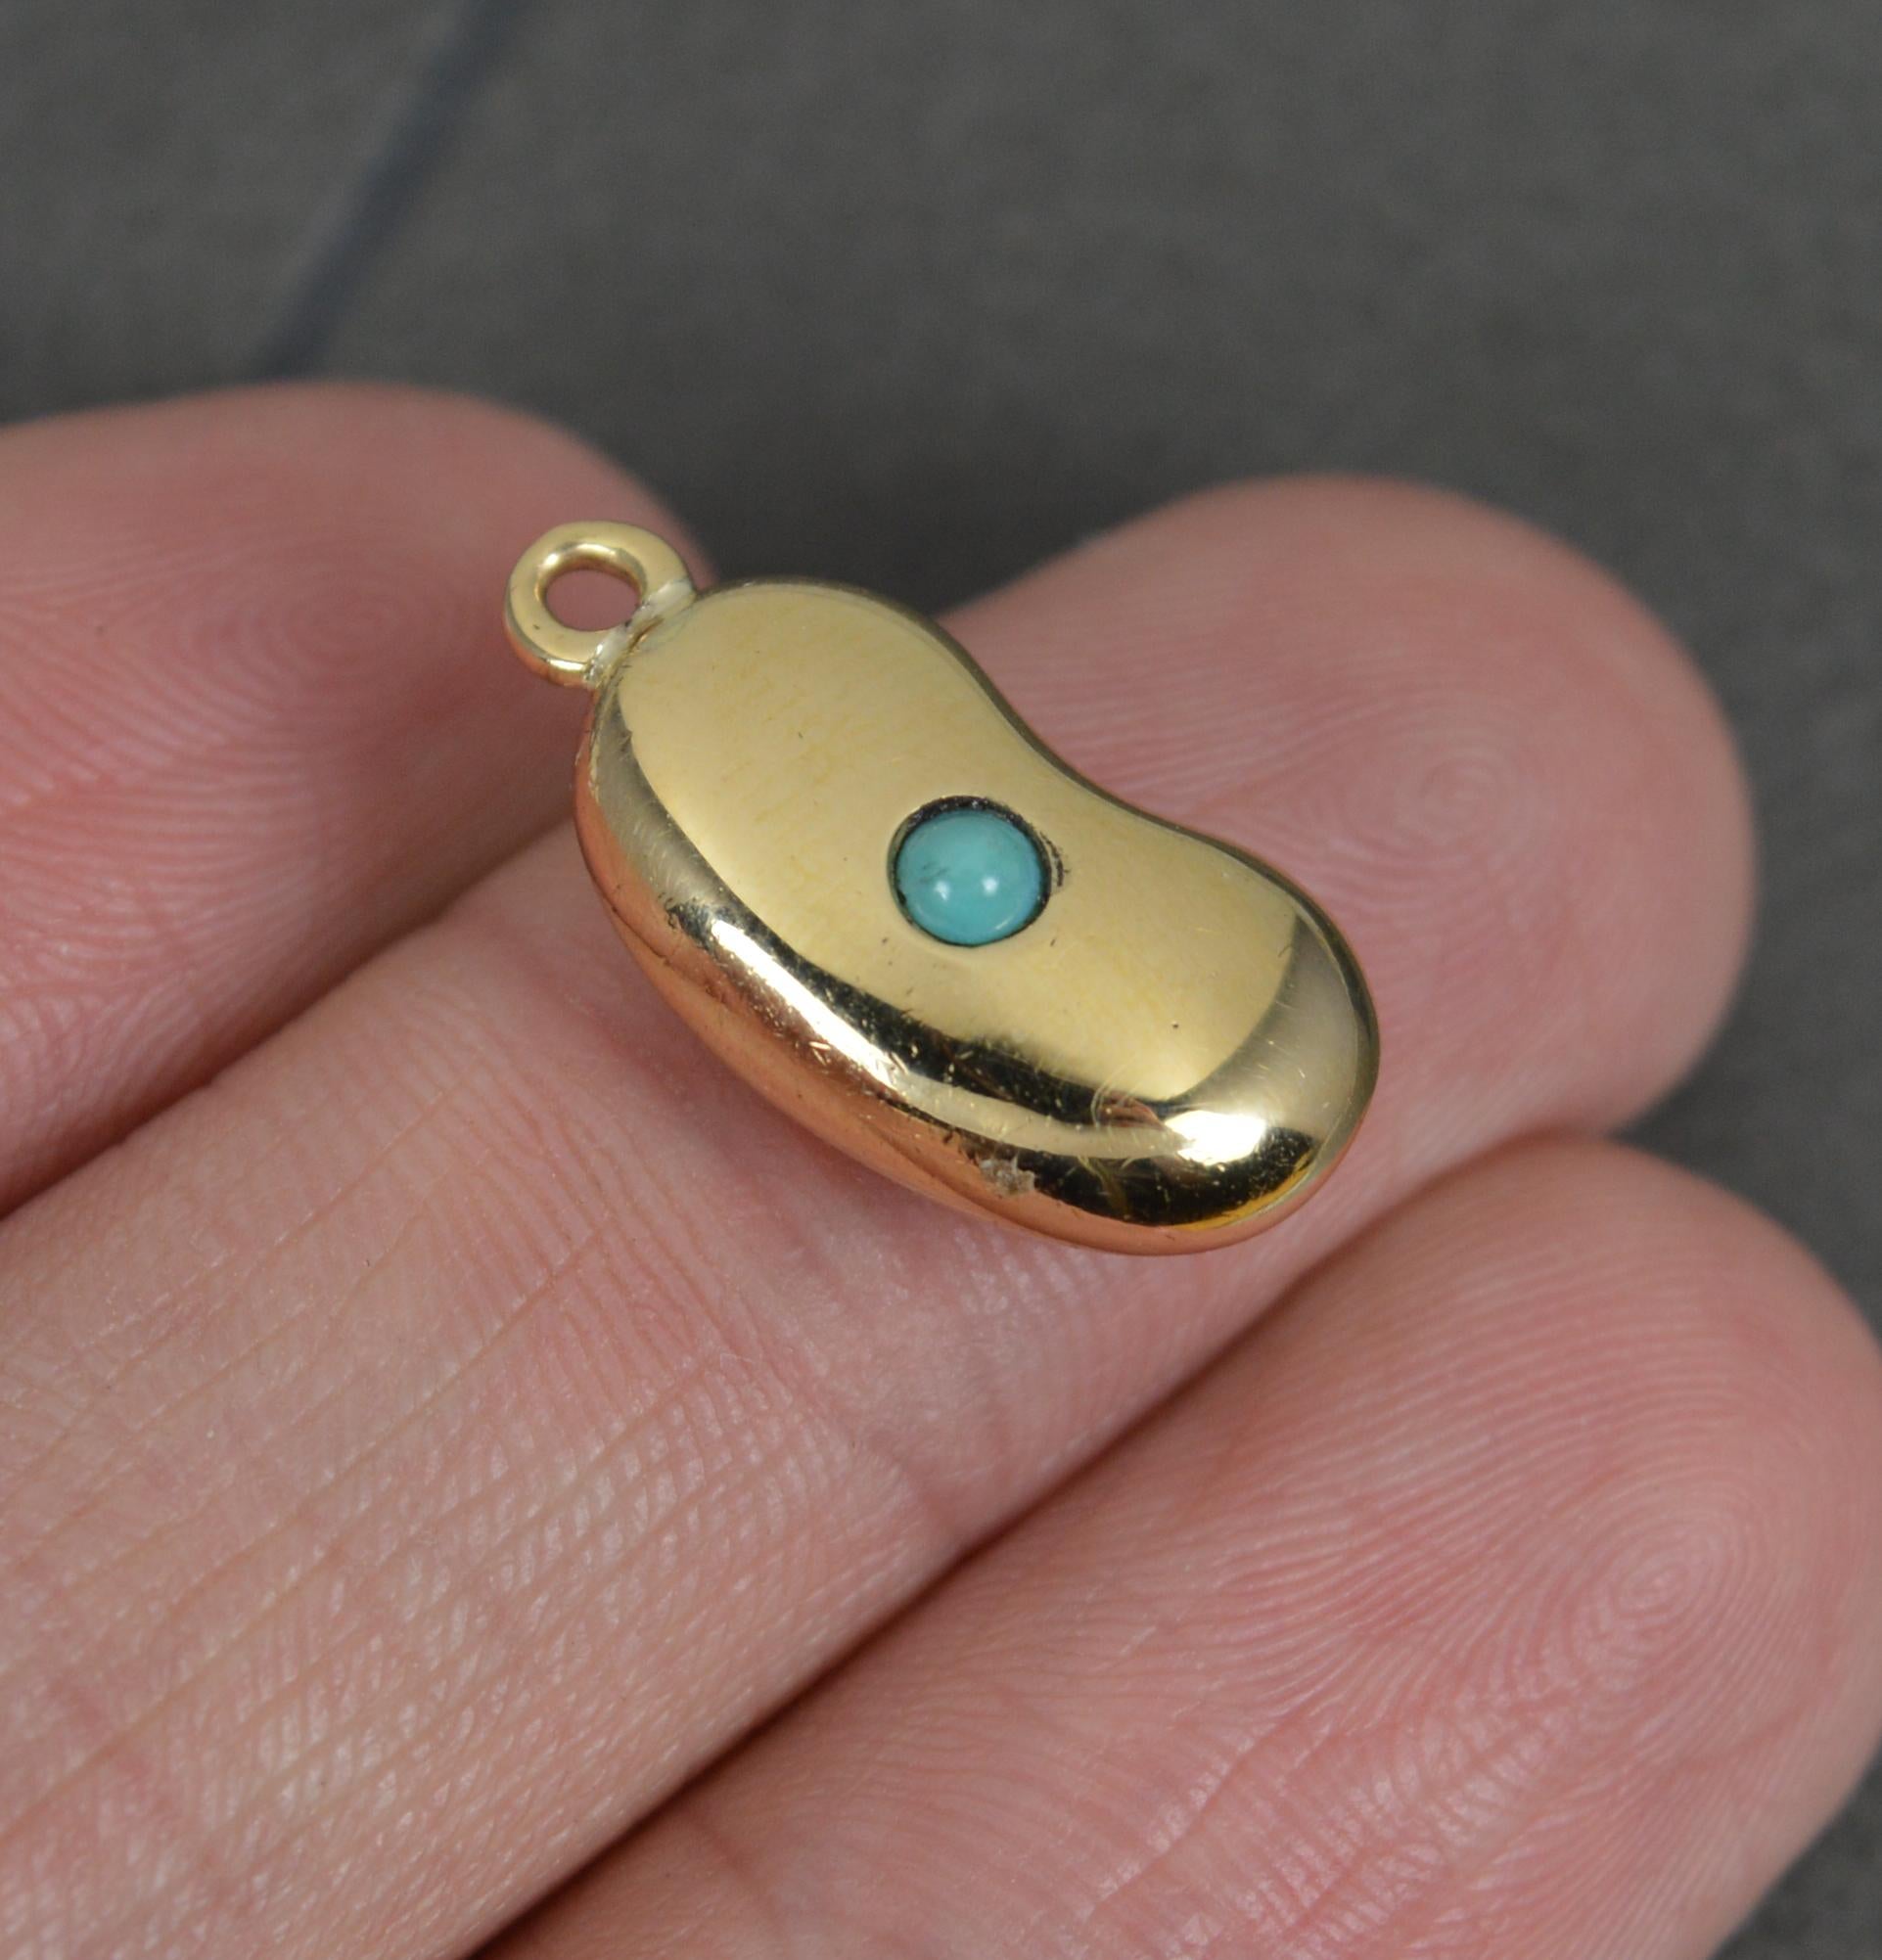 A superb English made Victorian kidney bean charm pendant.
A rare and collectable find. 
Solid 18 carat yellow gold example set with a single turquoise bead.
Circa 1880.
CONDITION ; Very good. Crisp design. Well set stone. Issue free. Please view